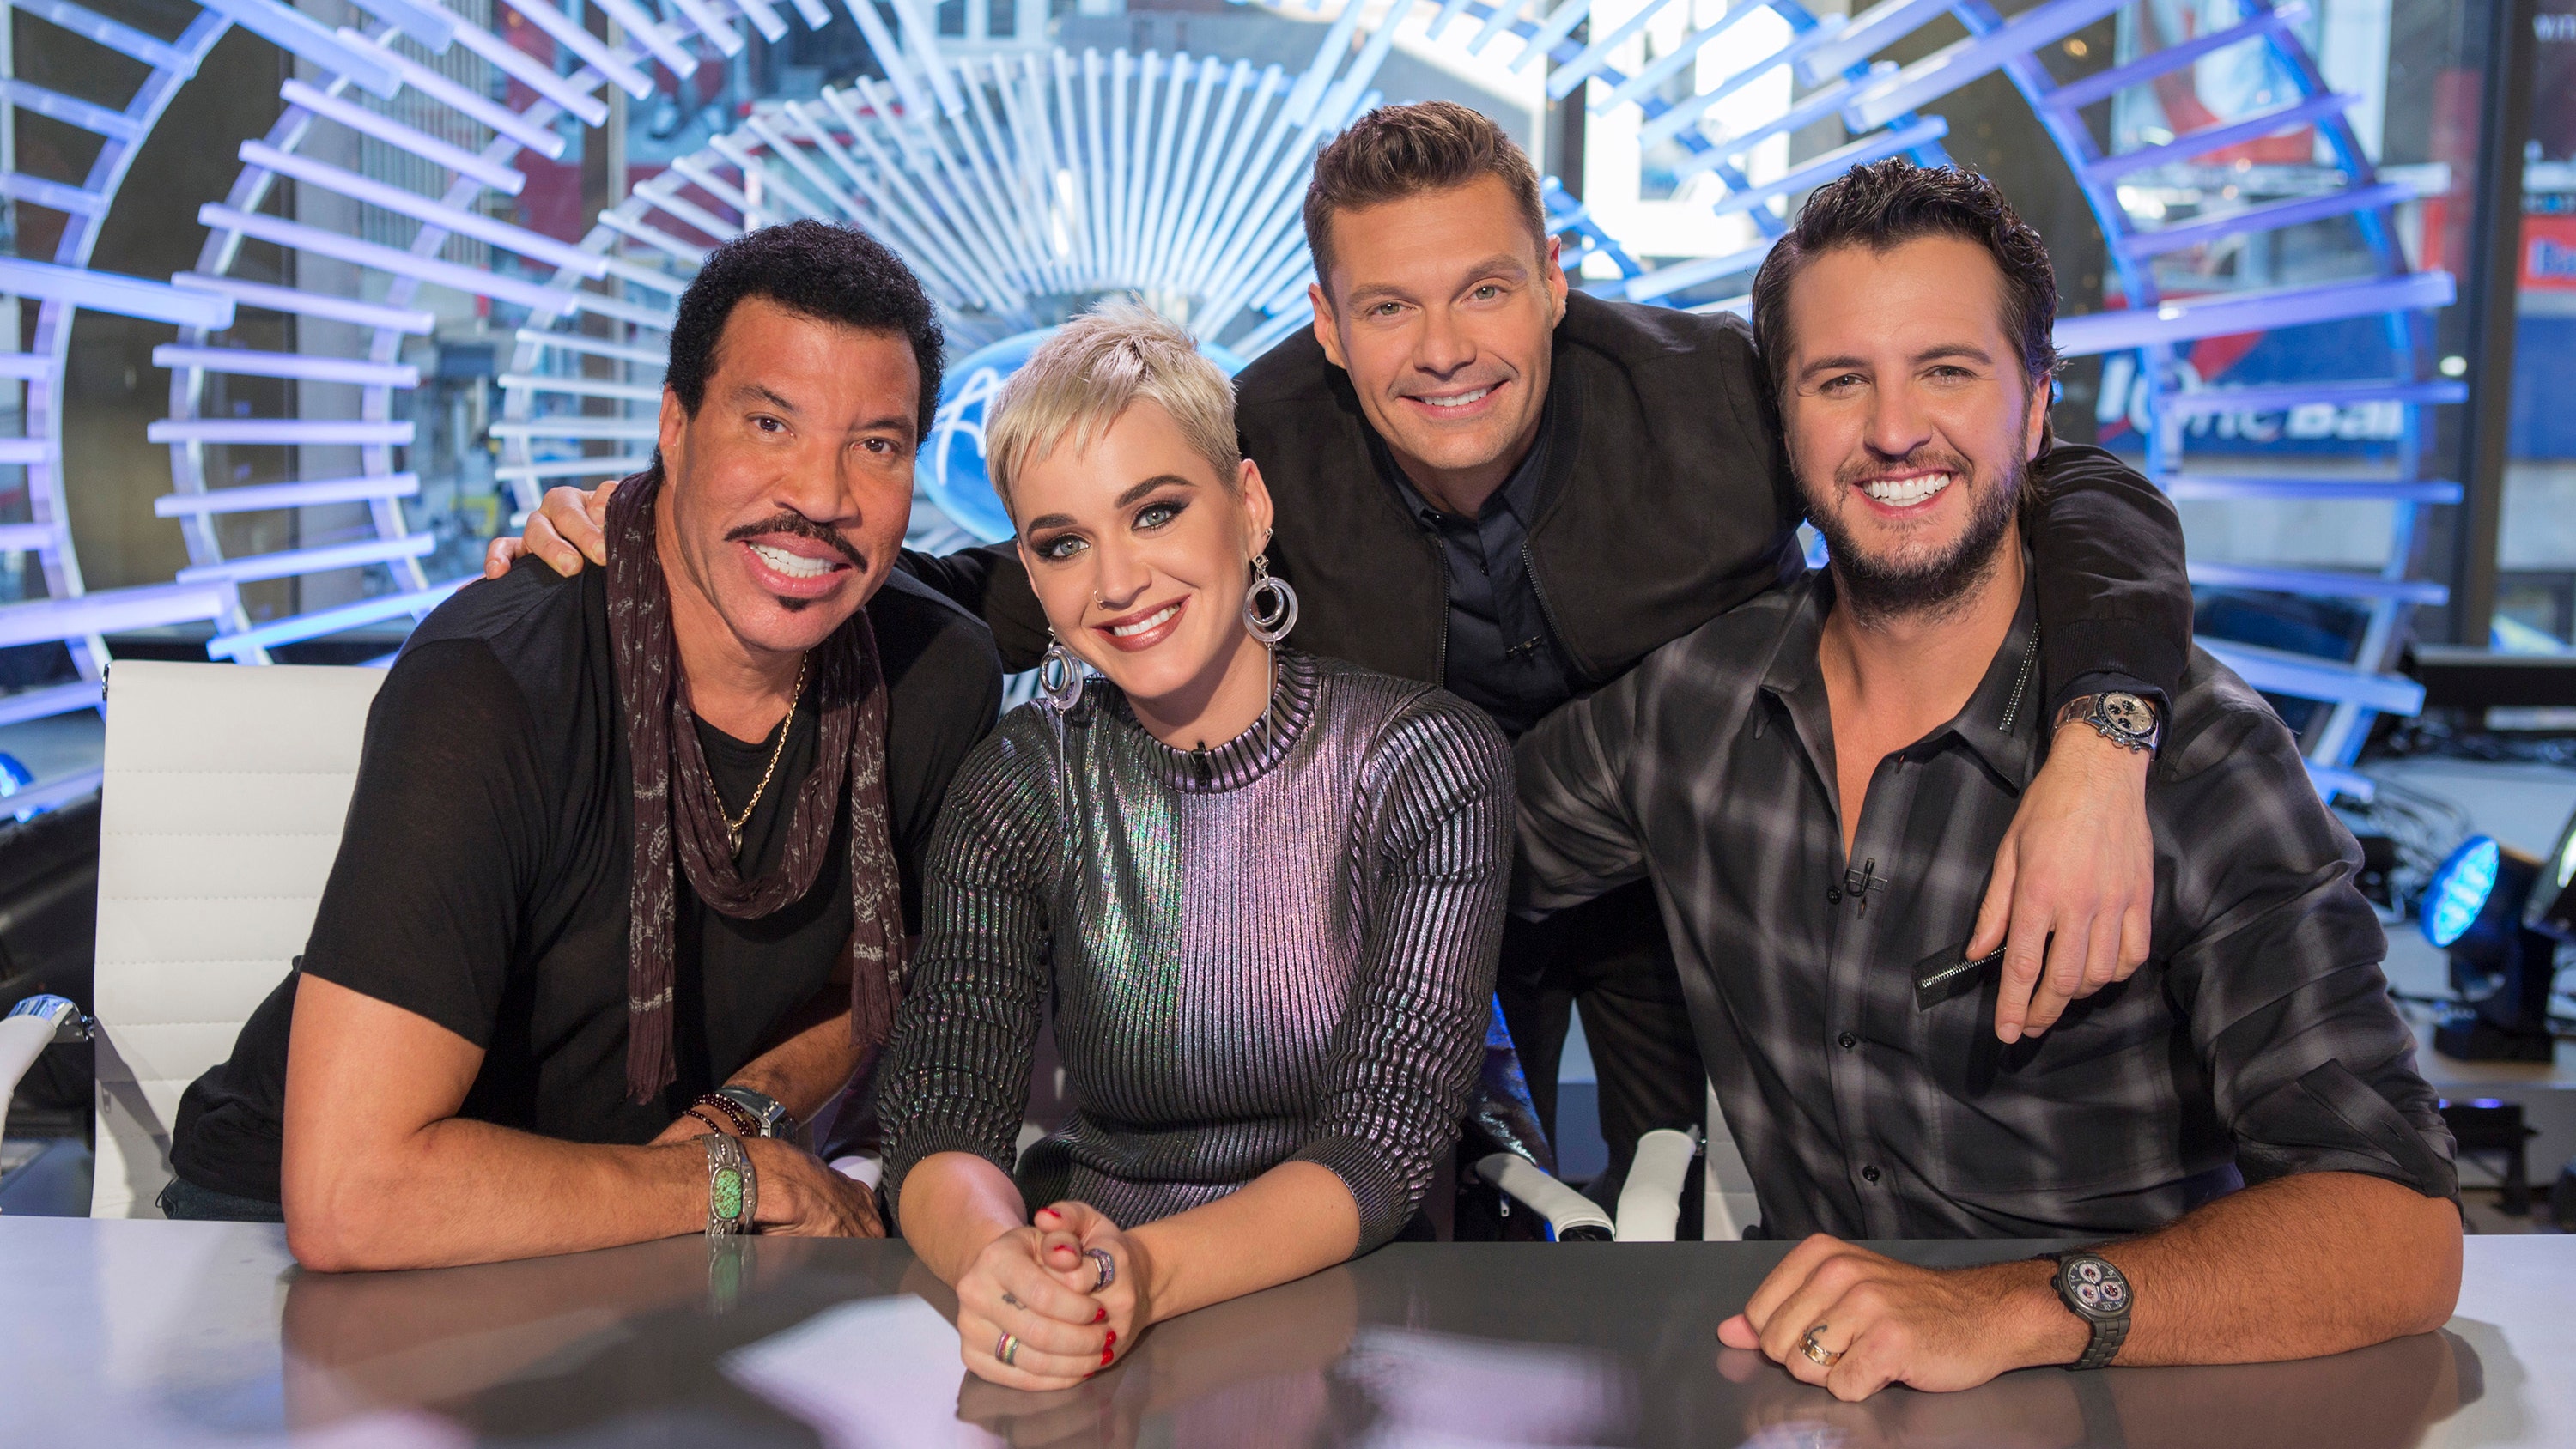 'American Idol' judges Katy Perry, Lionel Richie give update on Luke Bryan after coronavirus announcement